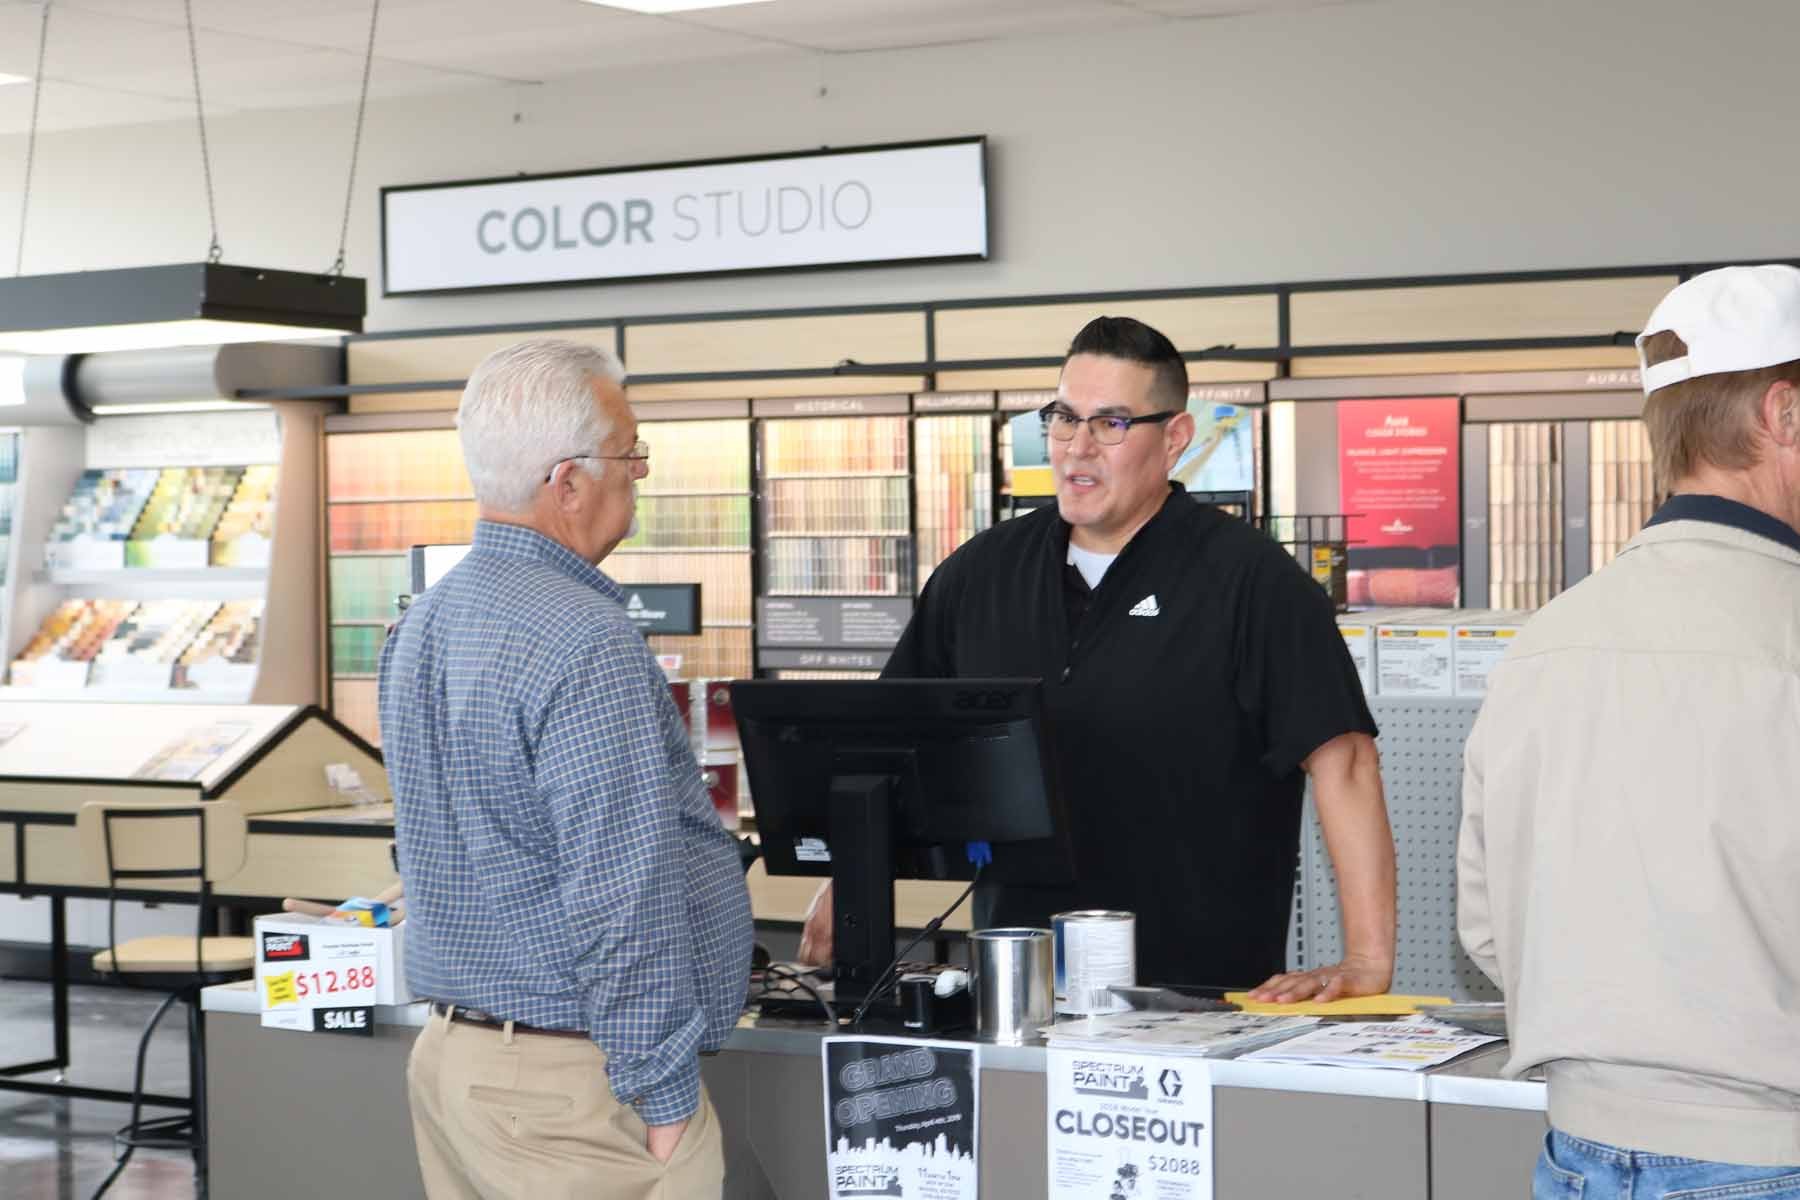 Counter Sales Paint Store Employee